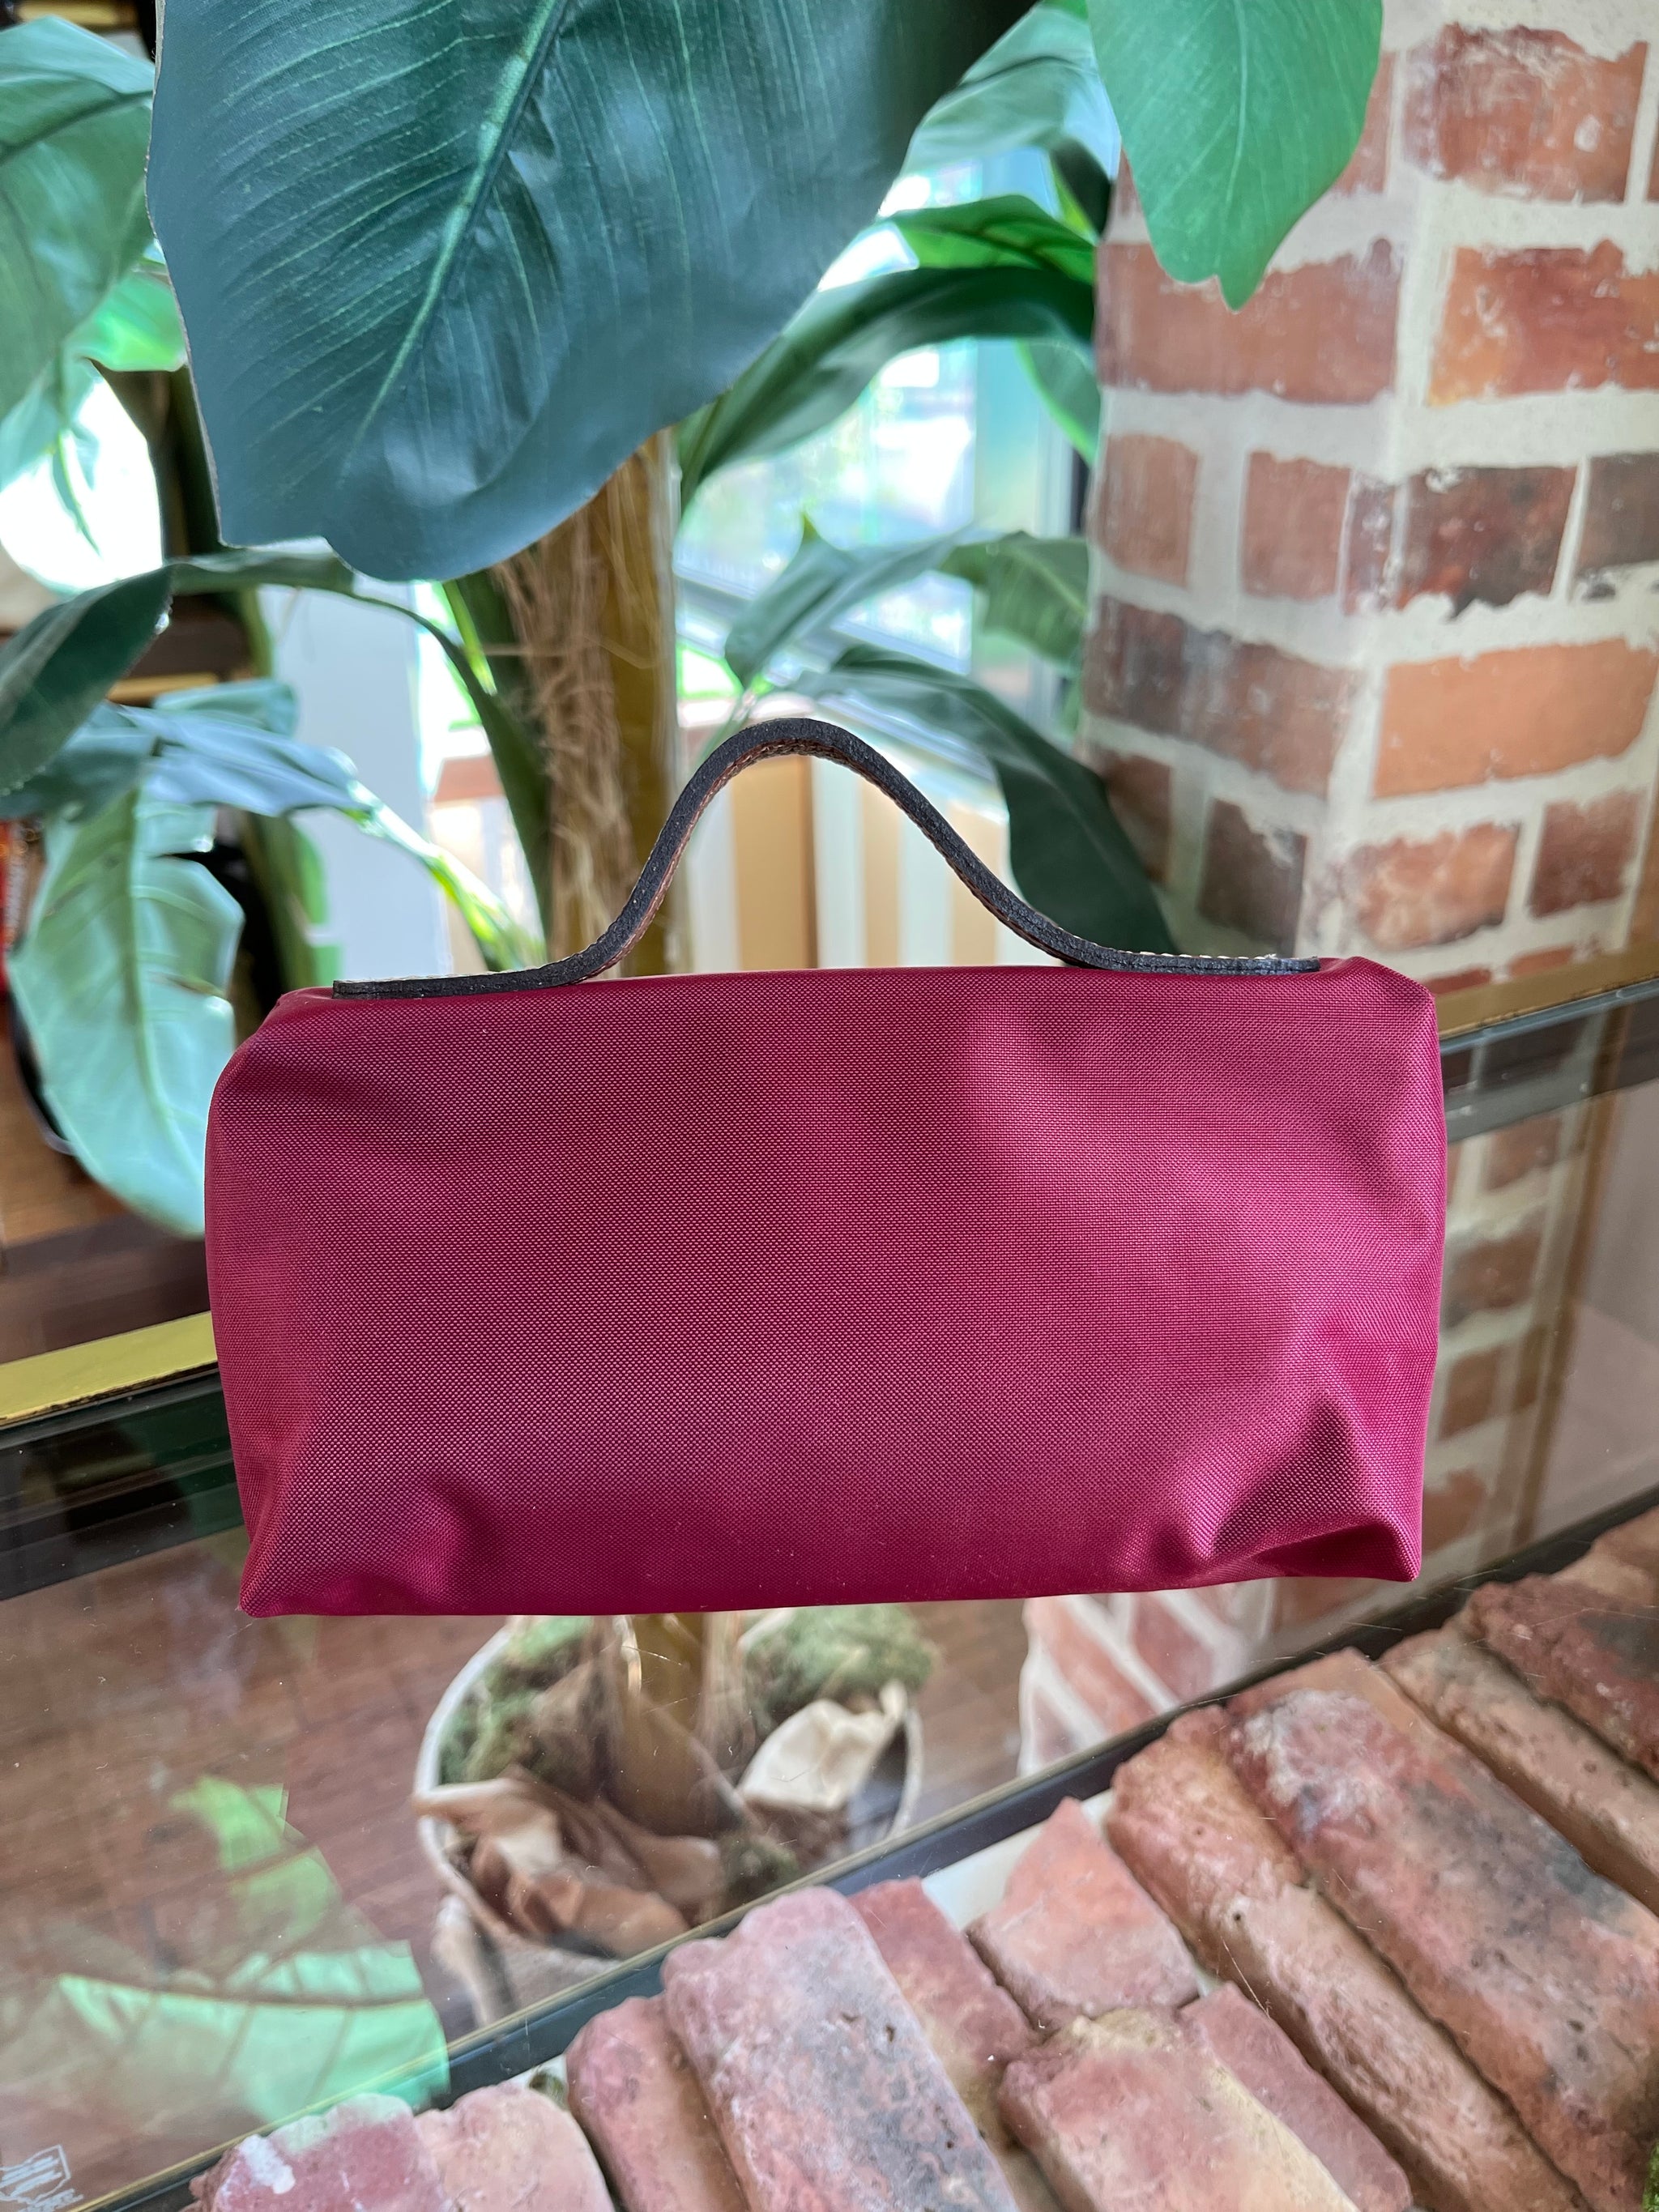 LONGCHAMP Red Nylon Le Pliage Cosmetic Pouch - The Purse Ladies